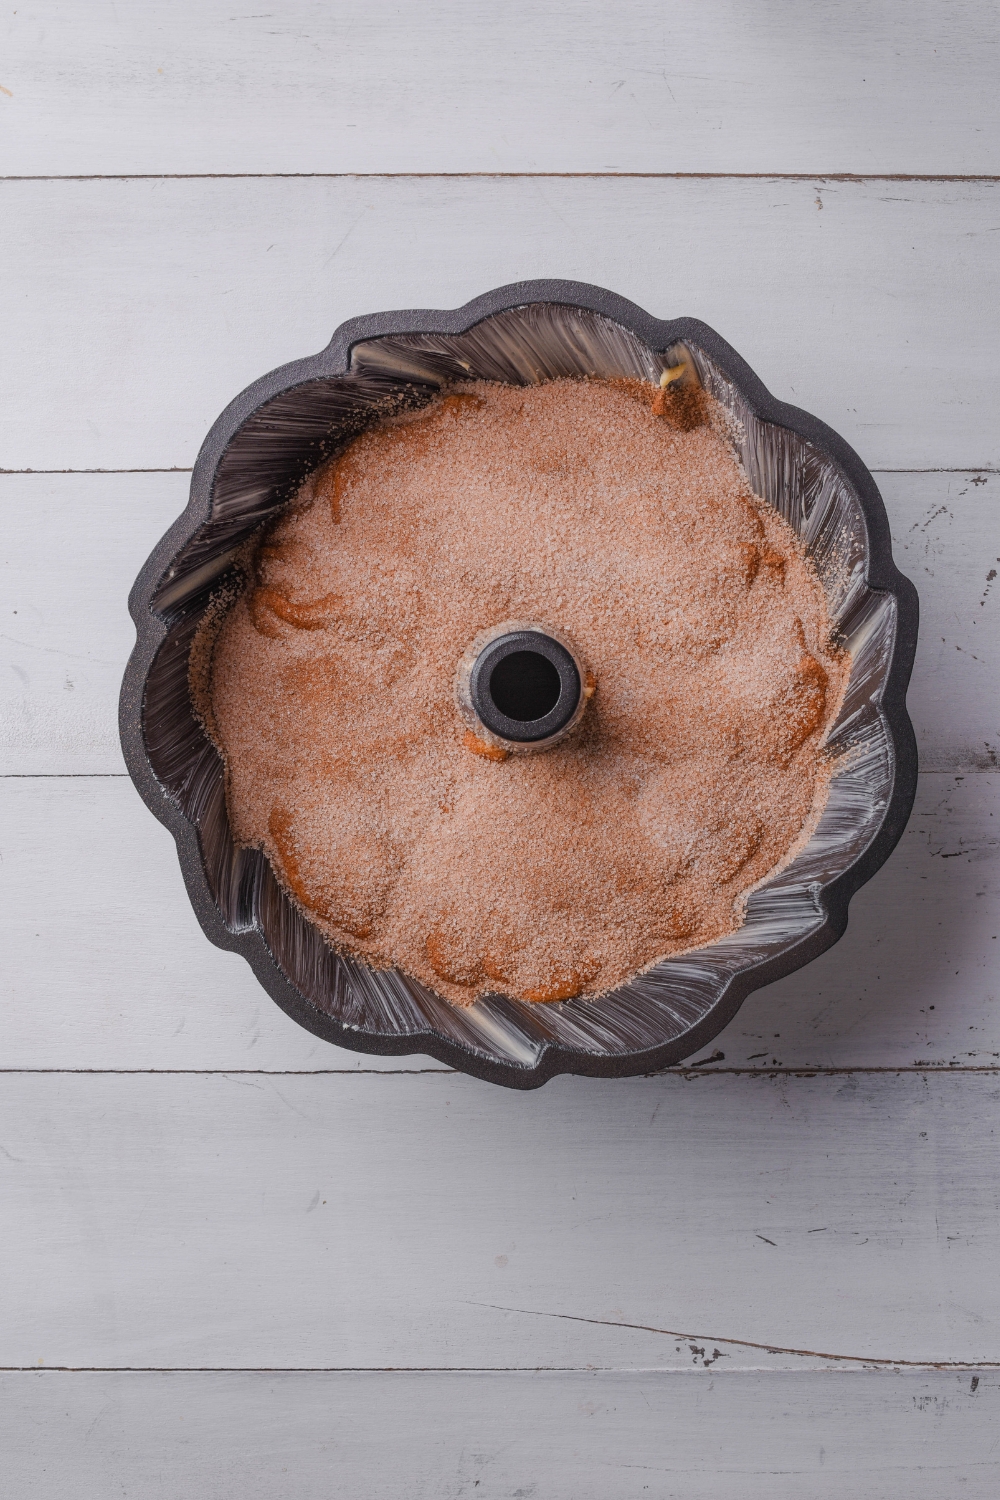 A black bundt cake pan holds half of the cinnamon bundt cake mixture. The cinnamon sugar mixture has been sprinkled on the top.